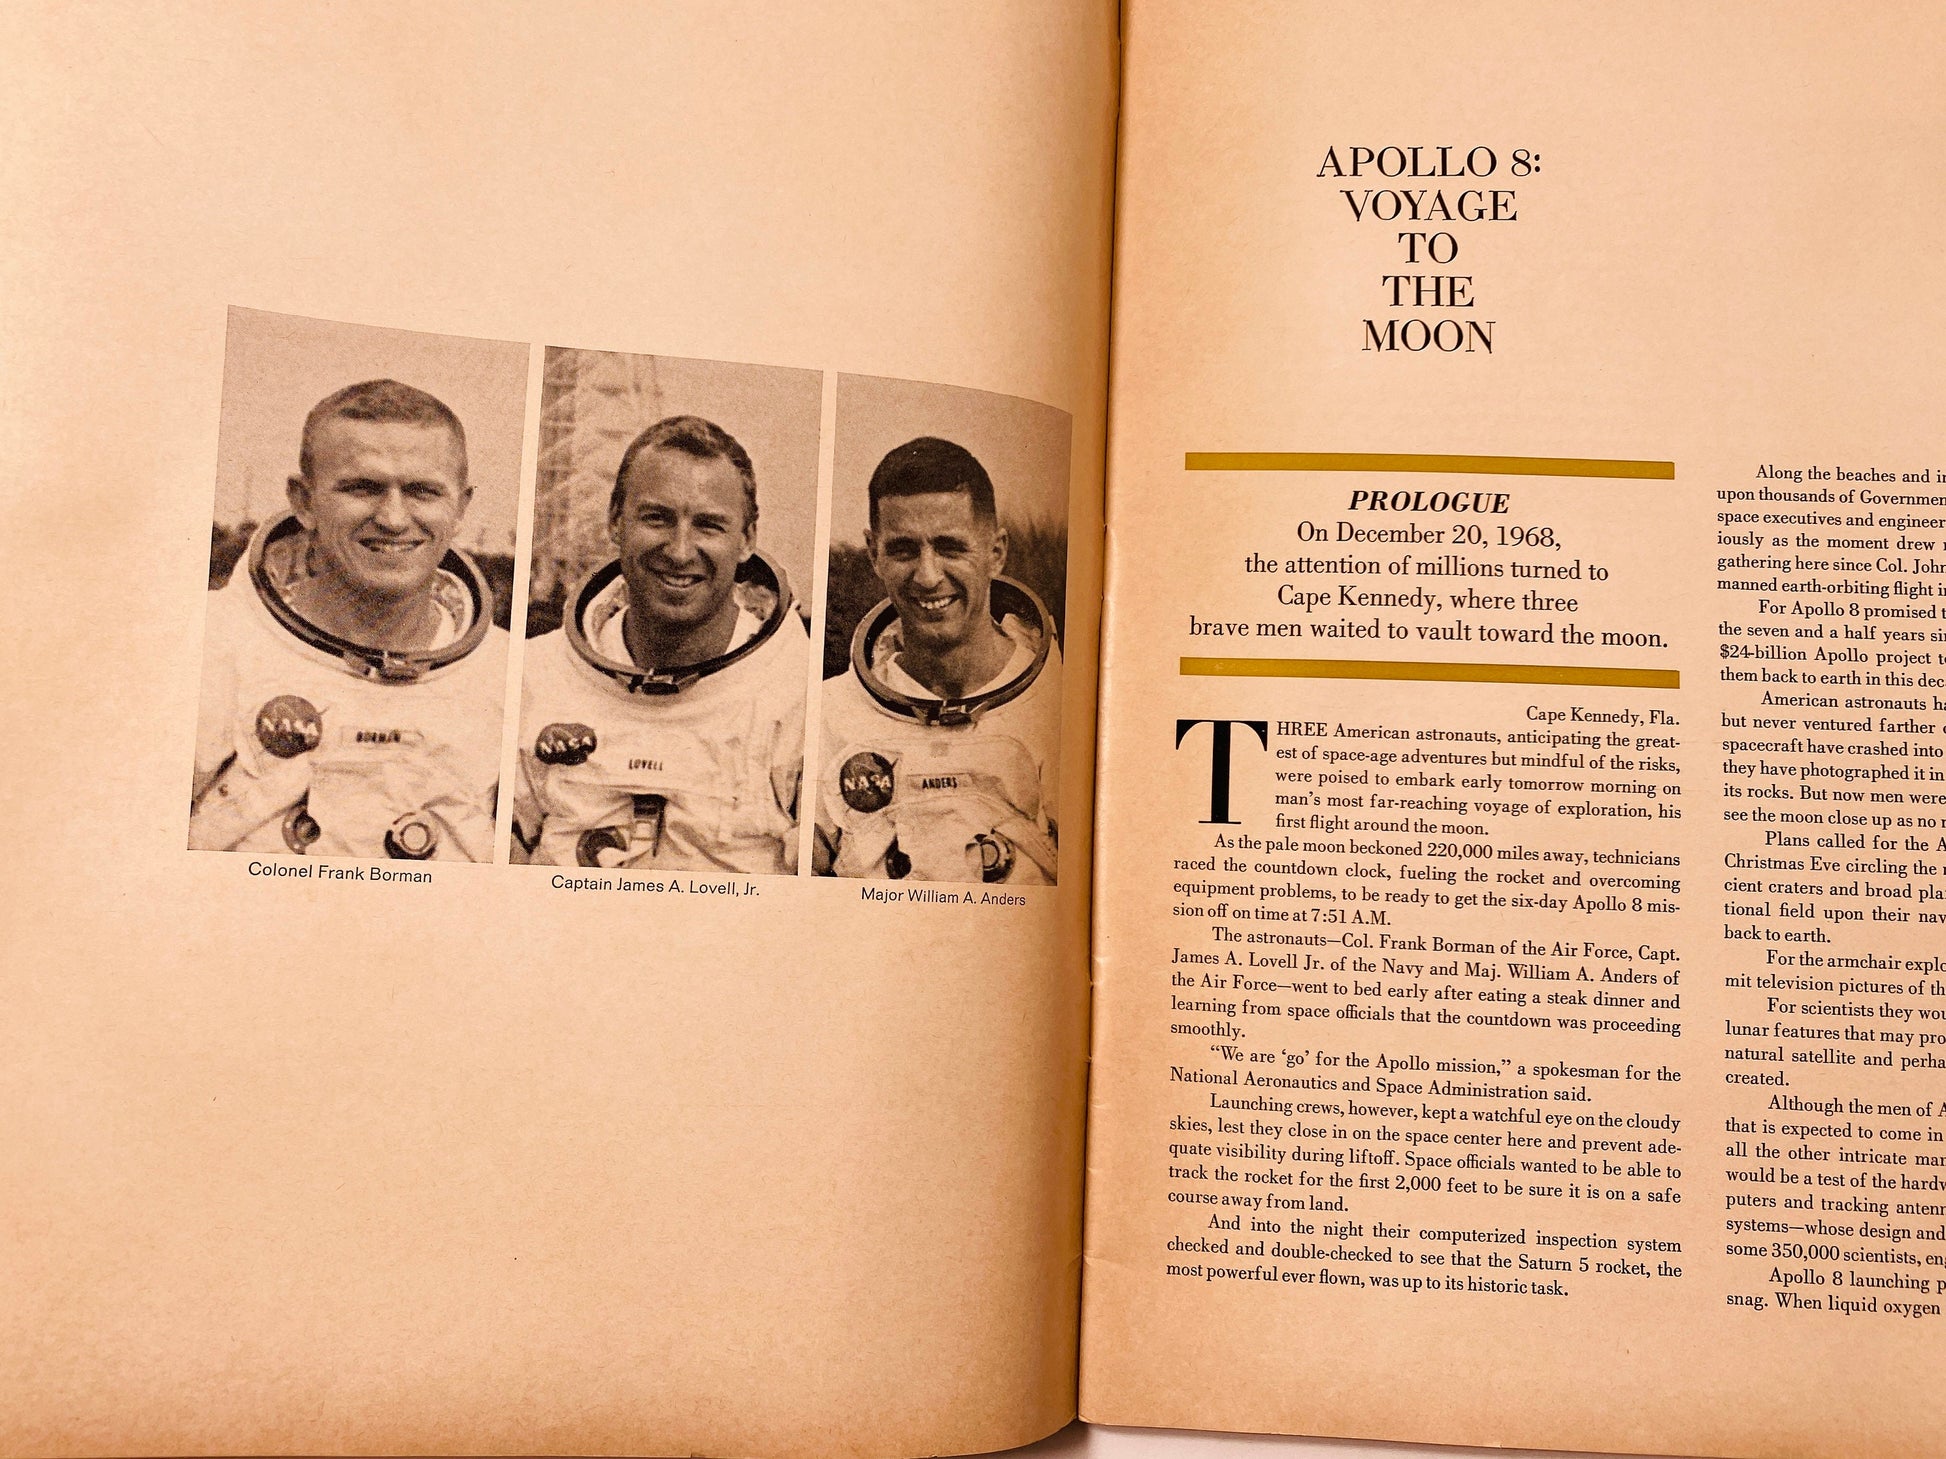 Apollo 8 vintage Look Magaine 1969 featuring the Eagle astronauts. NASA space moon landing pictures.